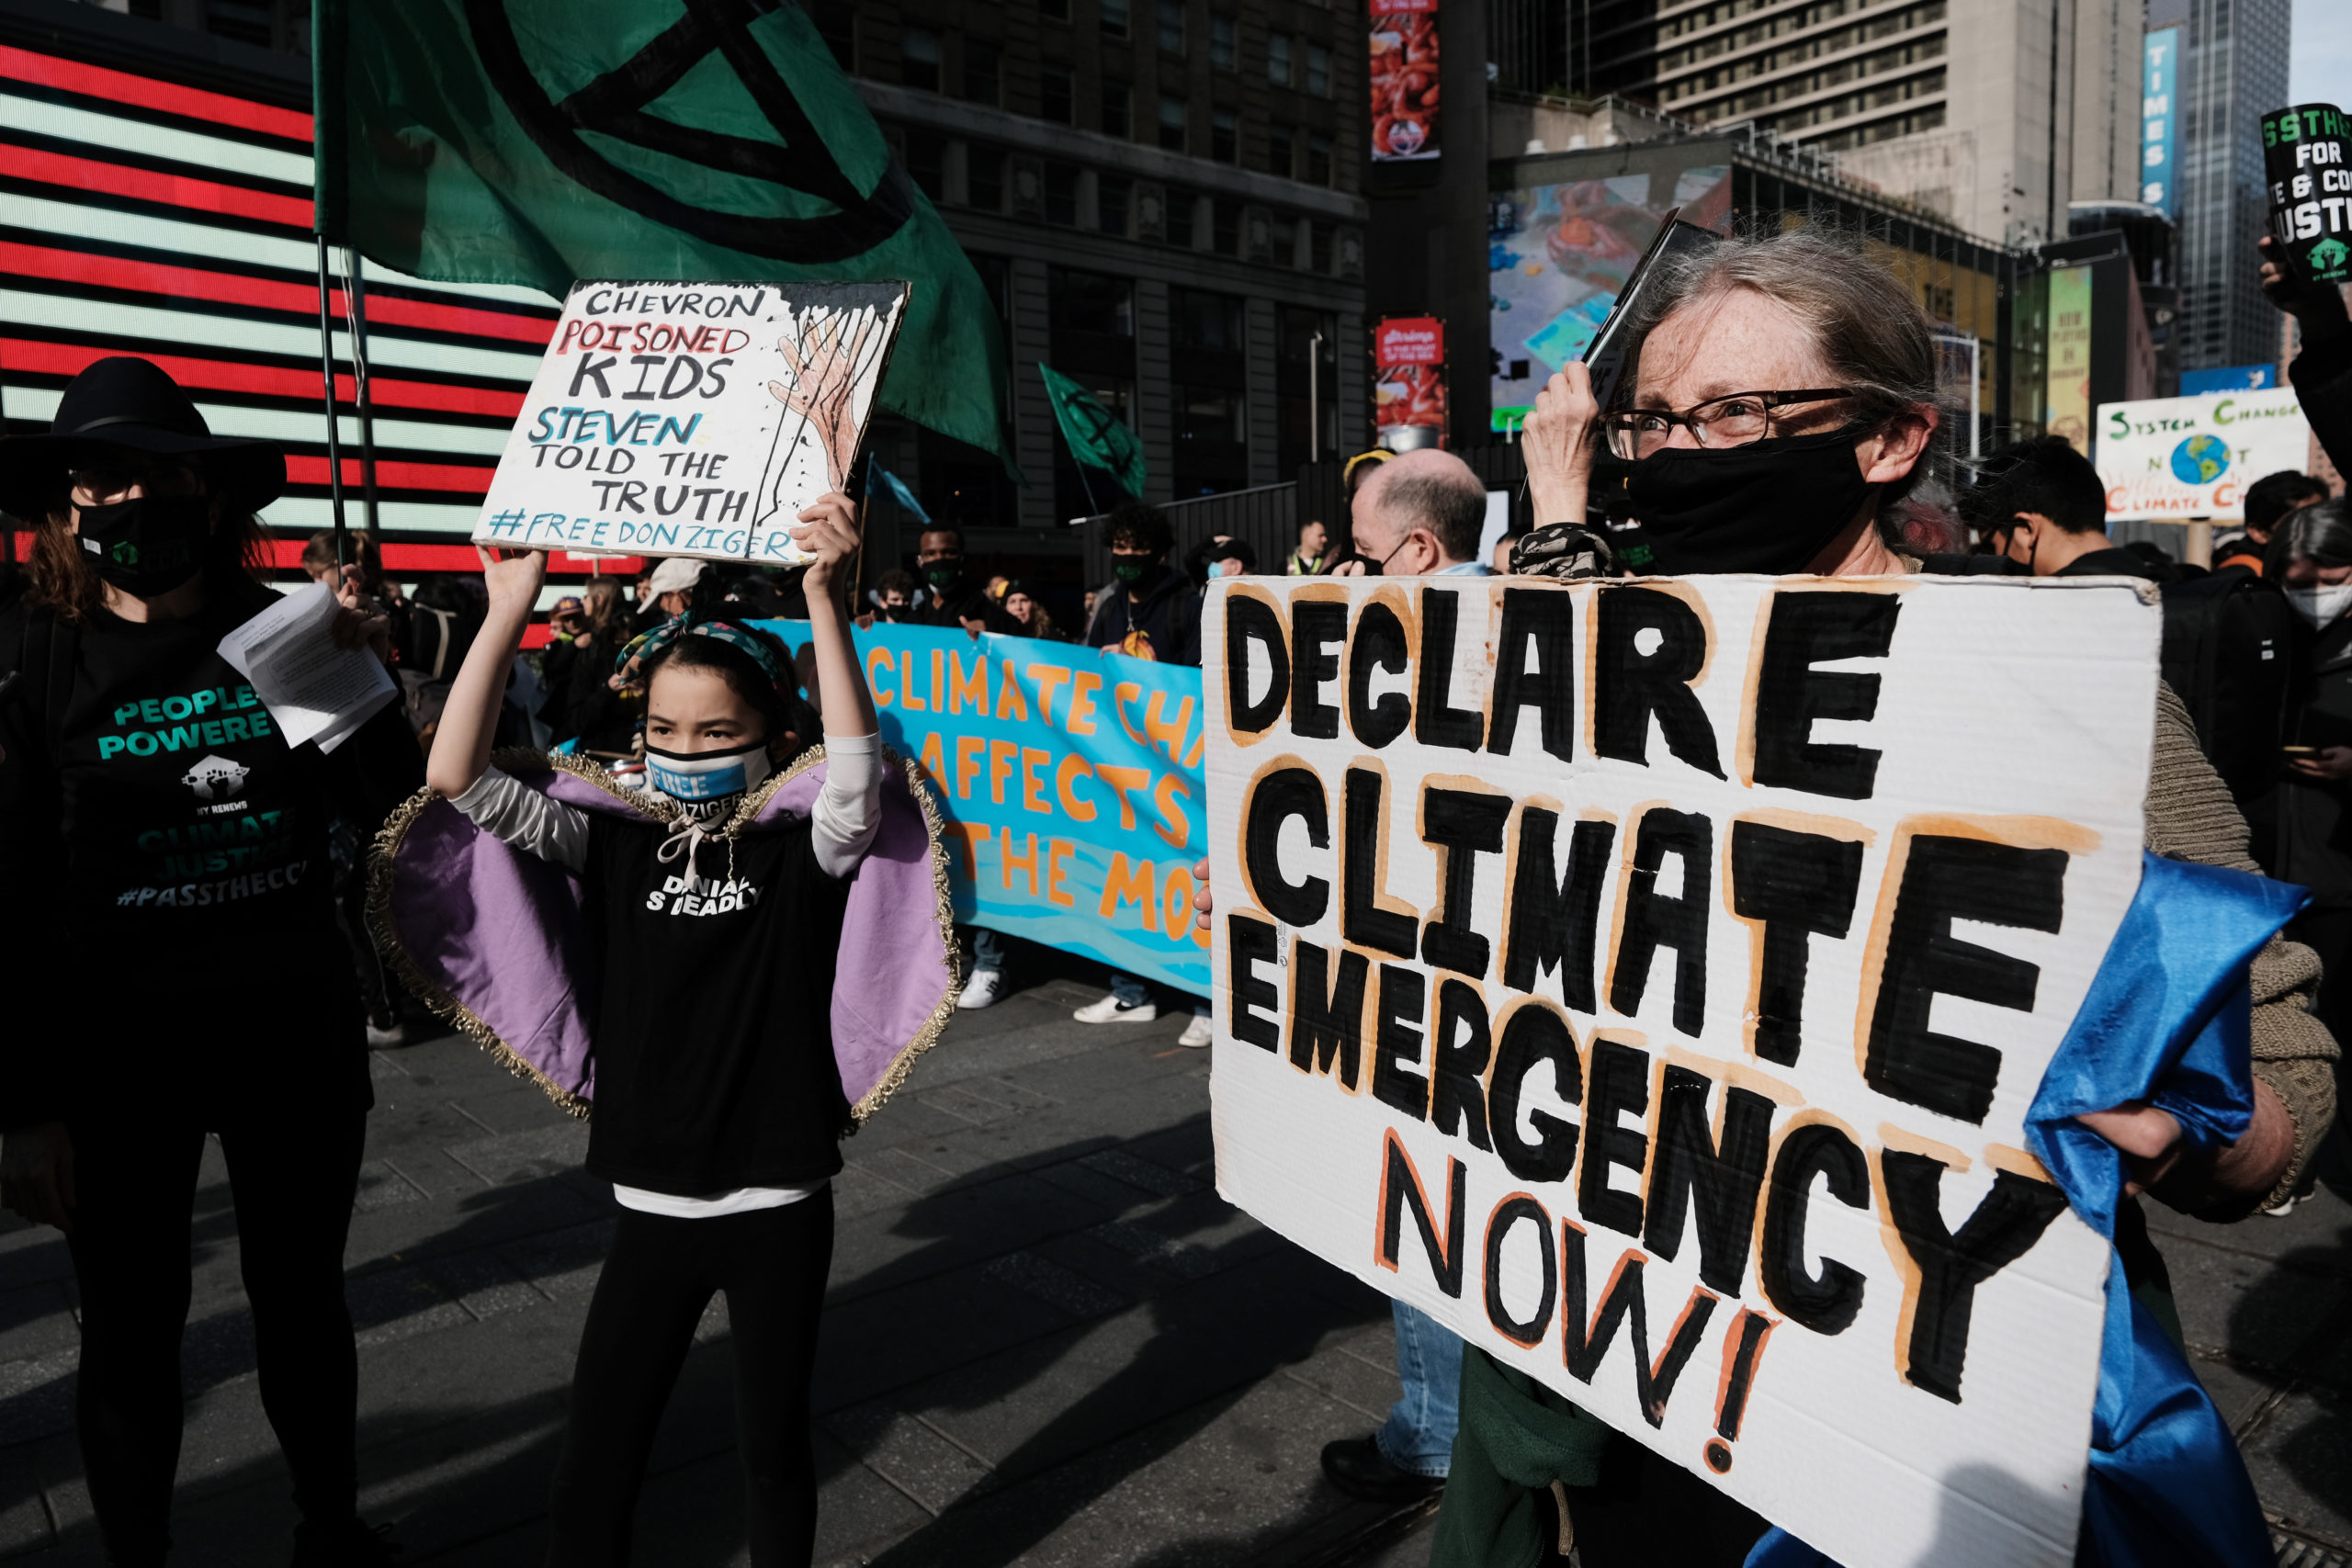 Hundreds of climate protesters assemble on Nov. 13 in New York City. (Spencer Platt/Getty Images)